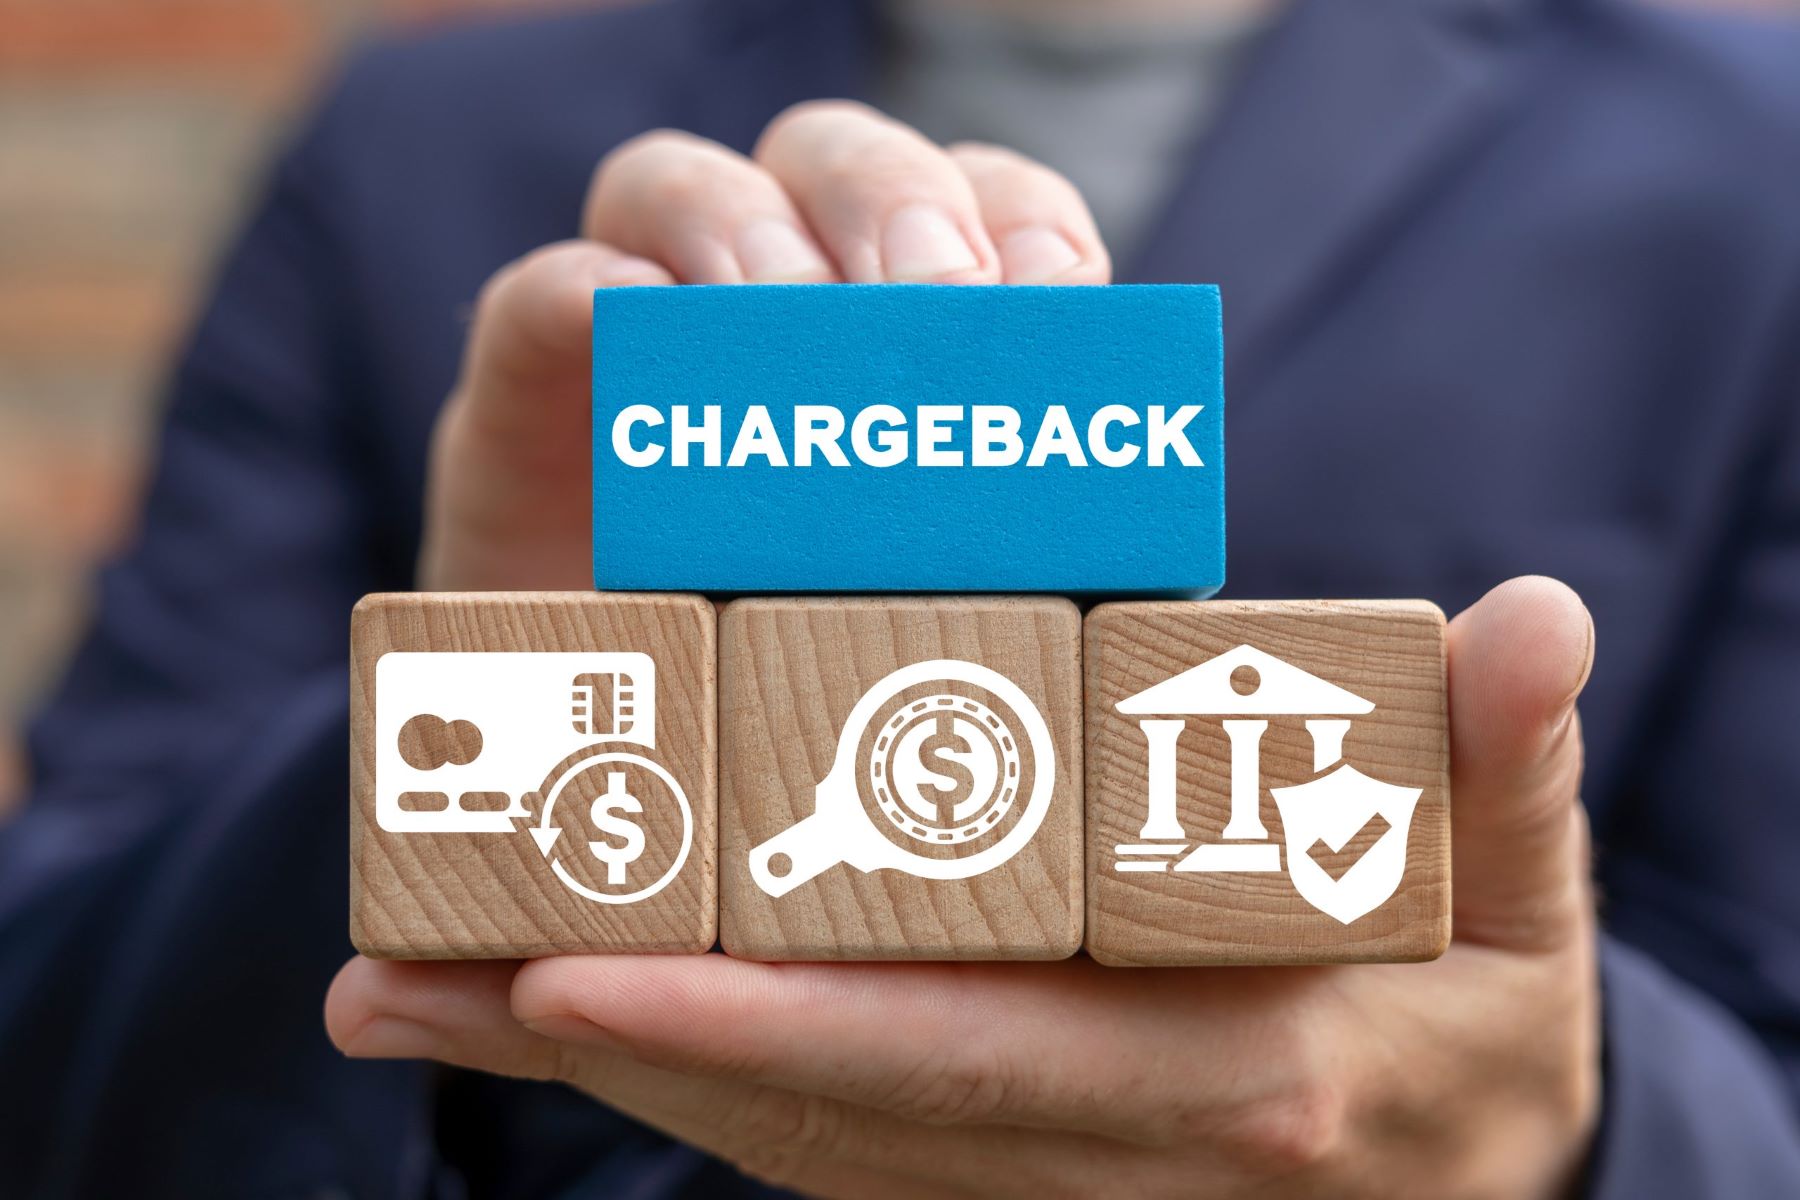 How To Reduce Credit Card Chargebacks